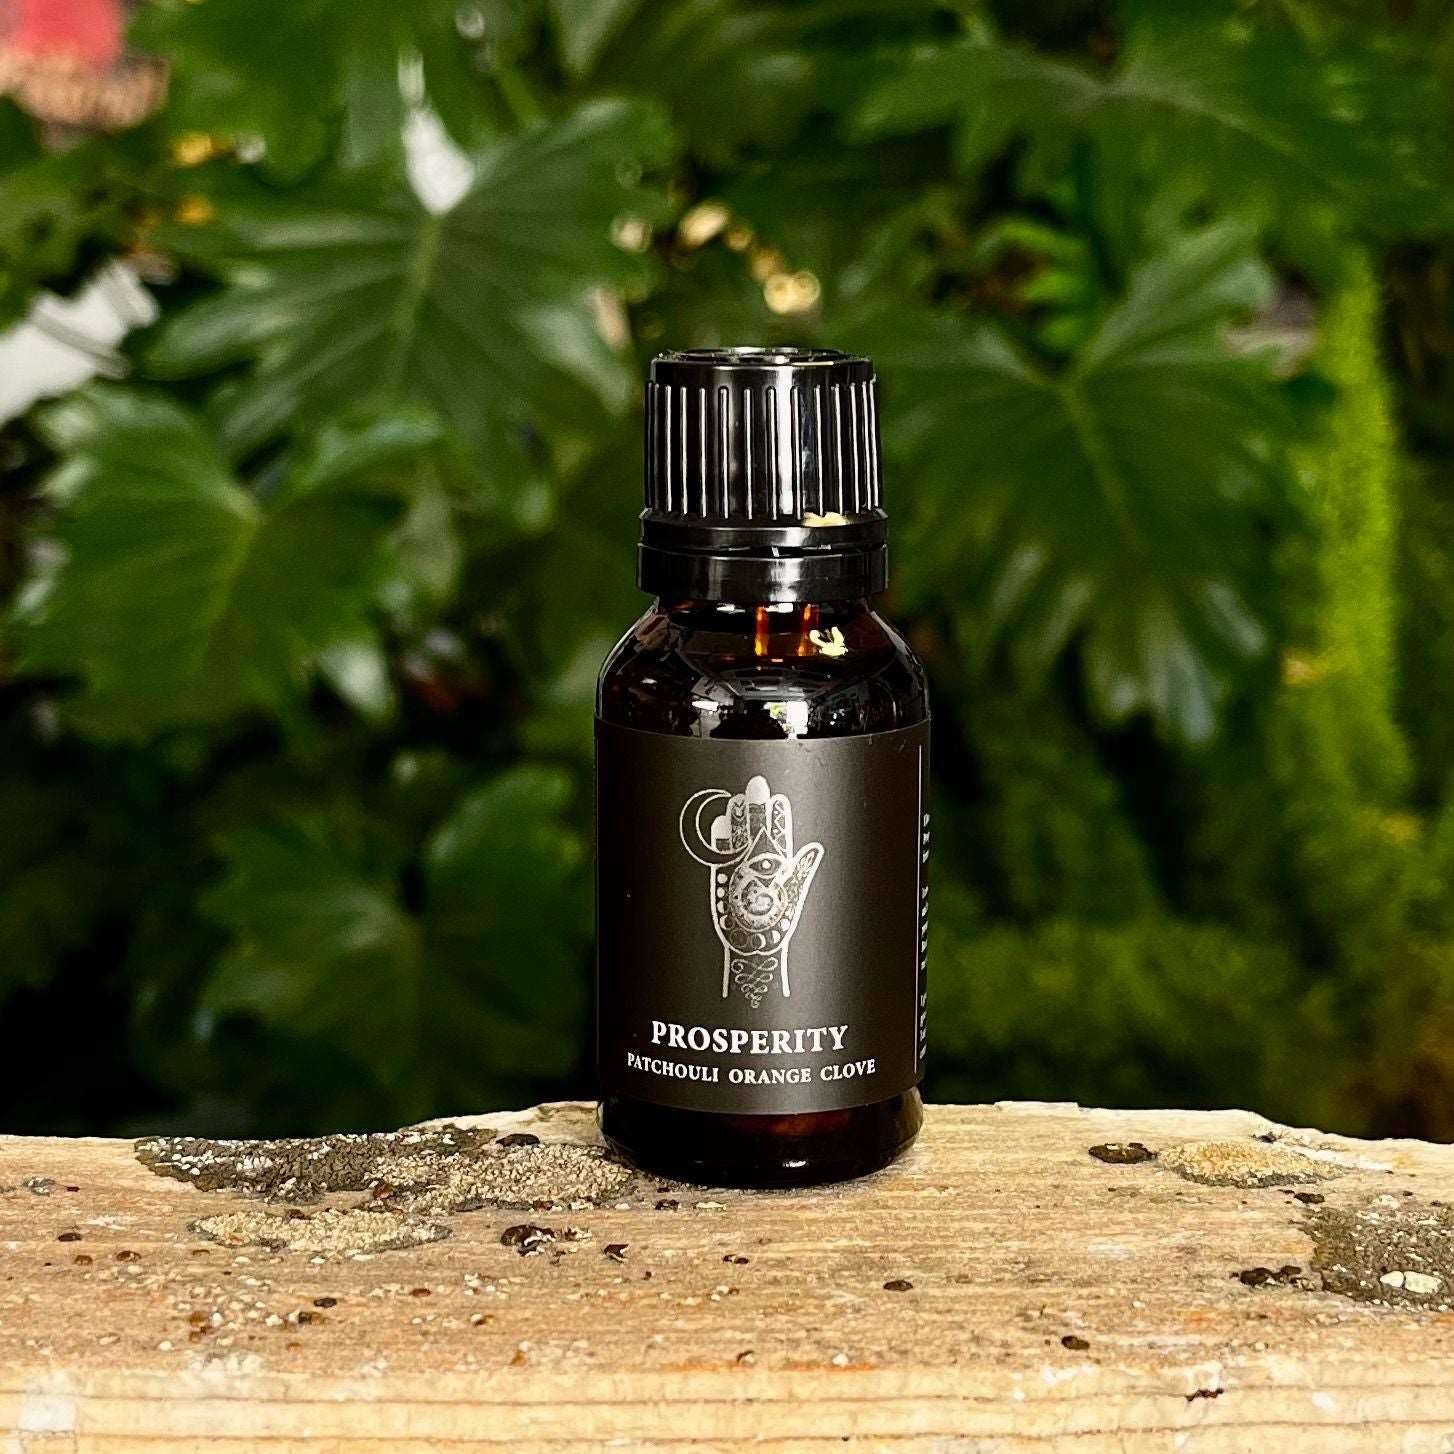 0.5 oz Prosperity Essential Oil Blend with a Proprietary Blend of Organic Essential Oils, Organic Fractionated Coconut Oil, and a Crystal Charged Under the Moon for Abundance and Manifesting Goals